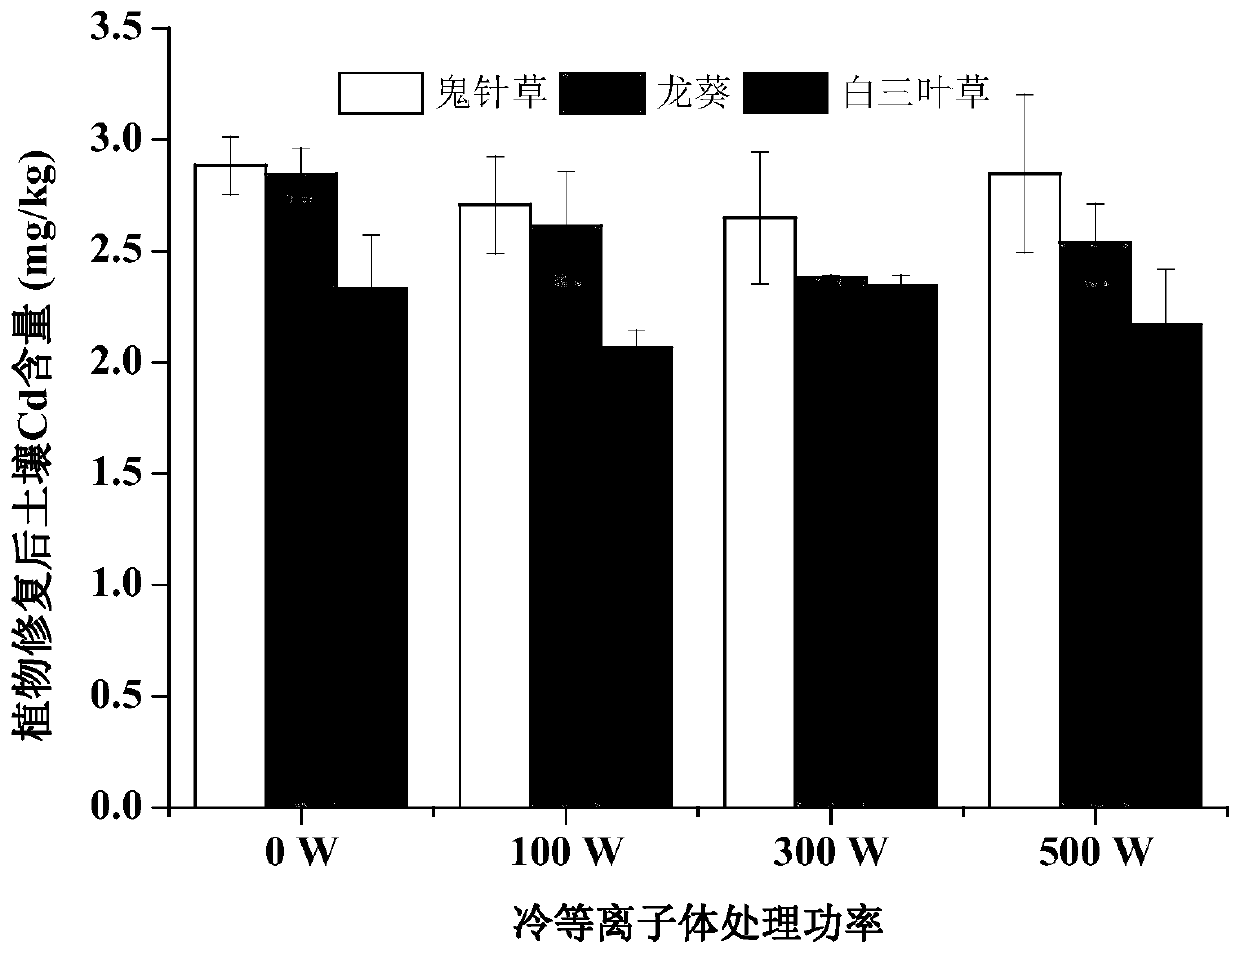 Application of cold plasma seed treatment method in strengthening phytoremediation of cadmium contaminated soil